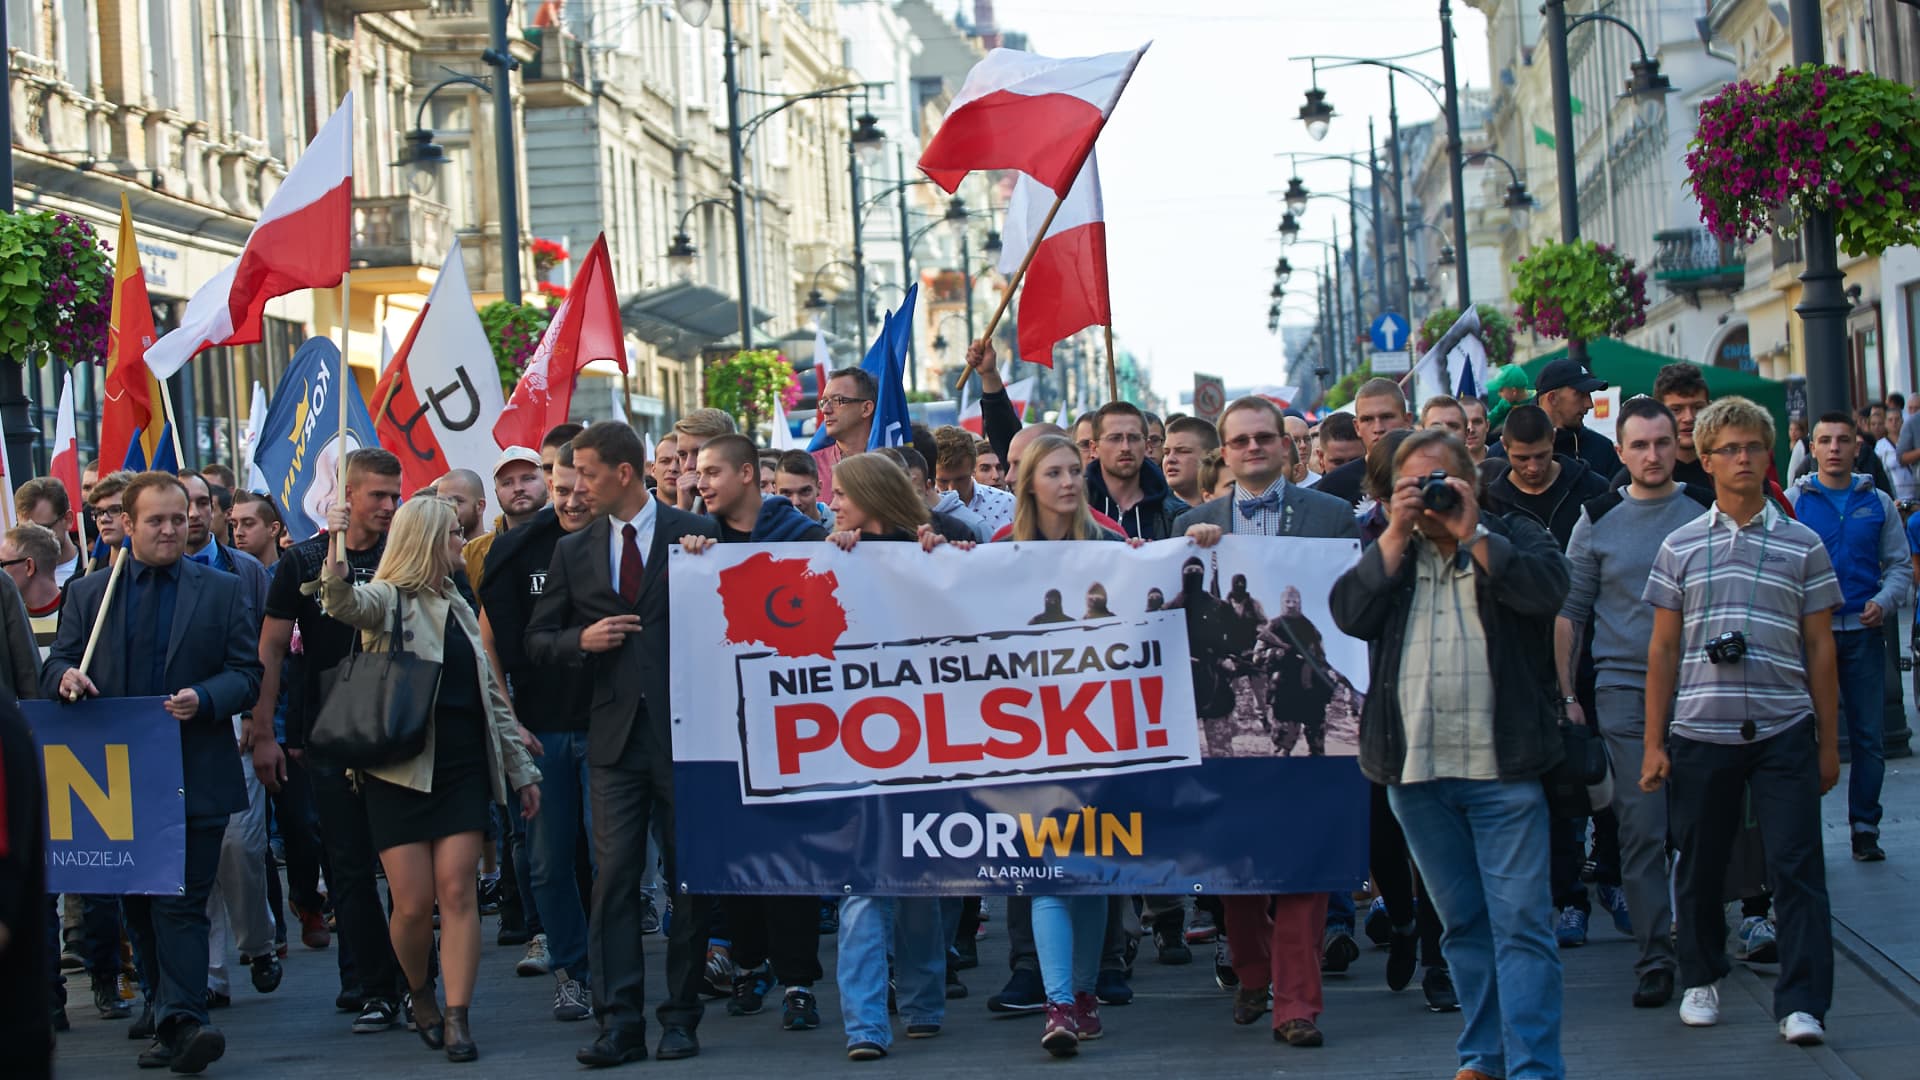 Members of far-right political party ONR protest against the implementation of the welcome policy towards foreign migrants from Syria and Iraq on September 12, 2015 in Lodz, Poland.